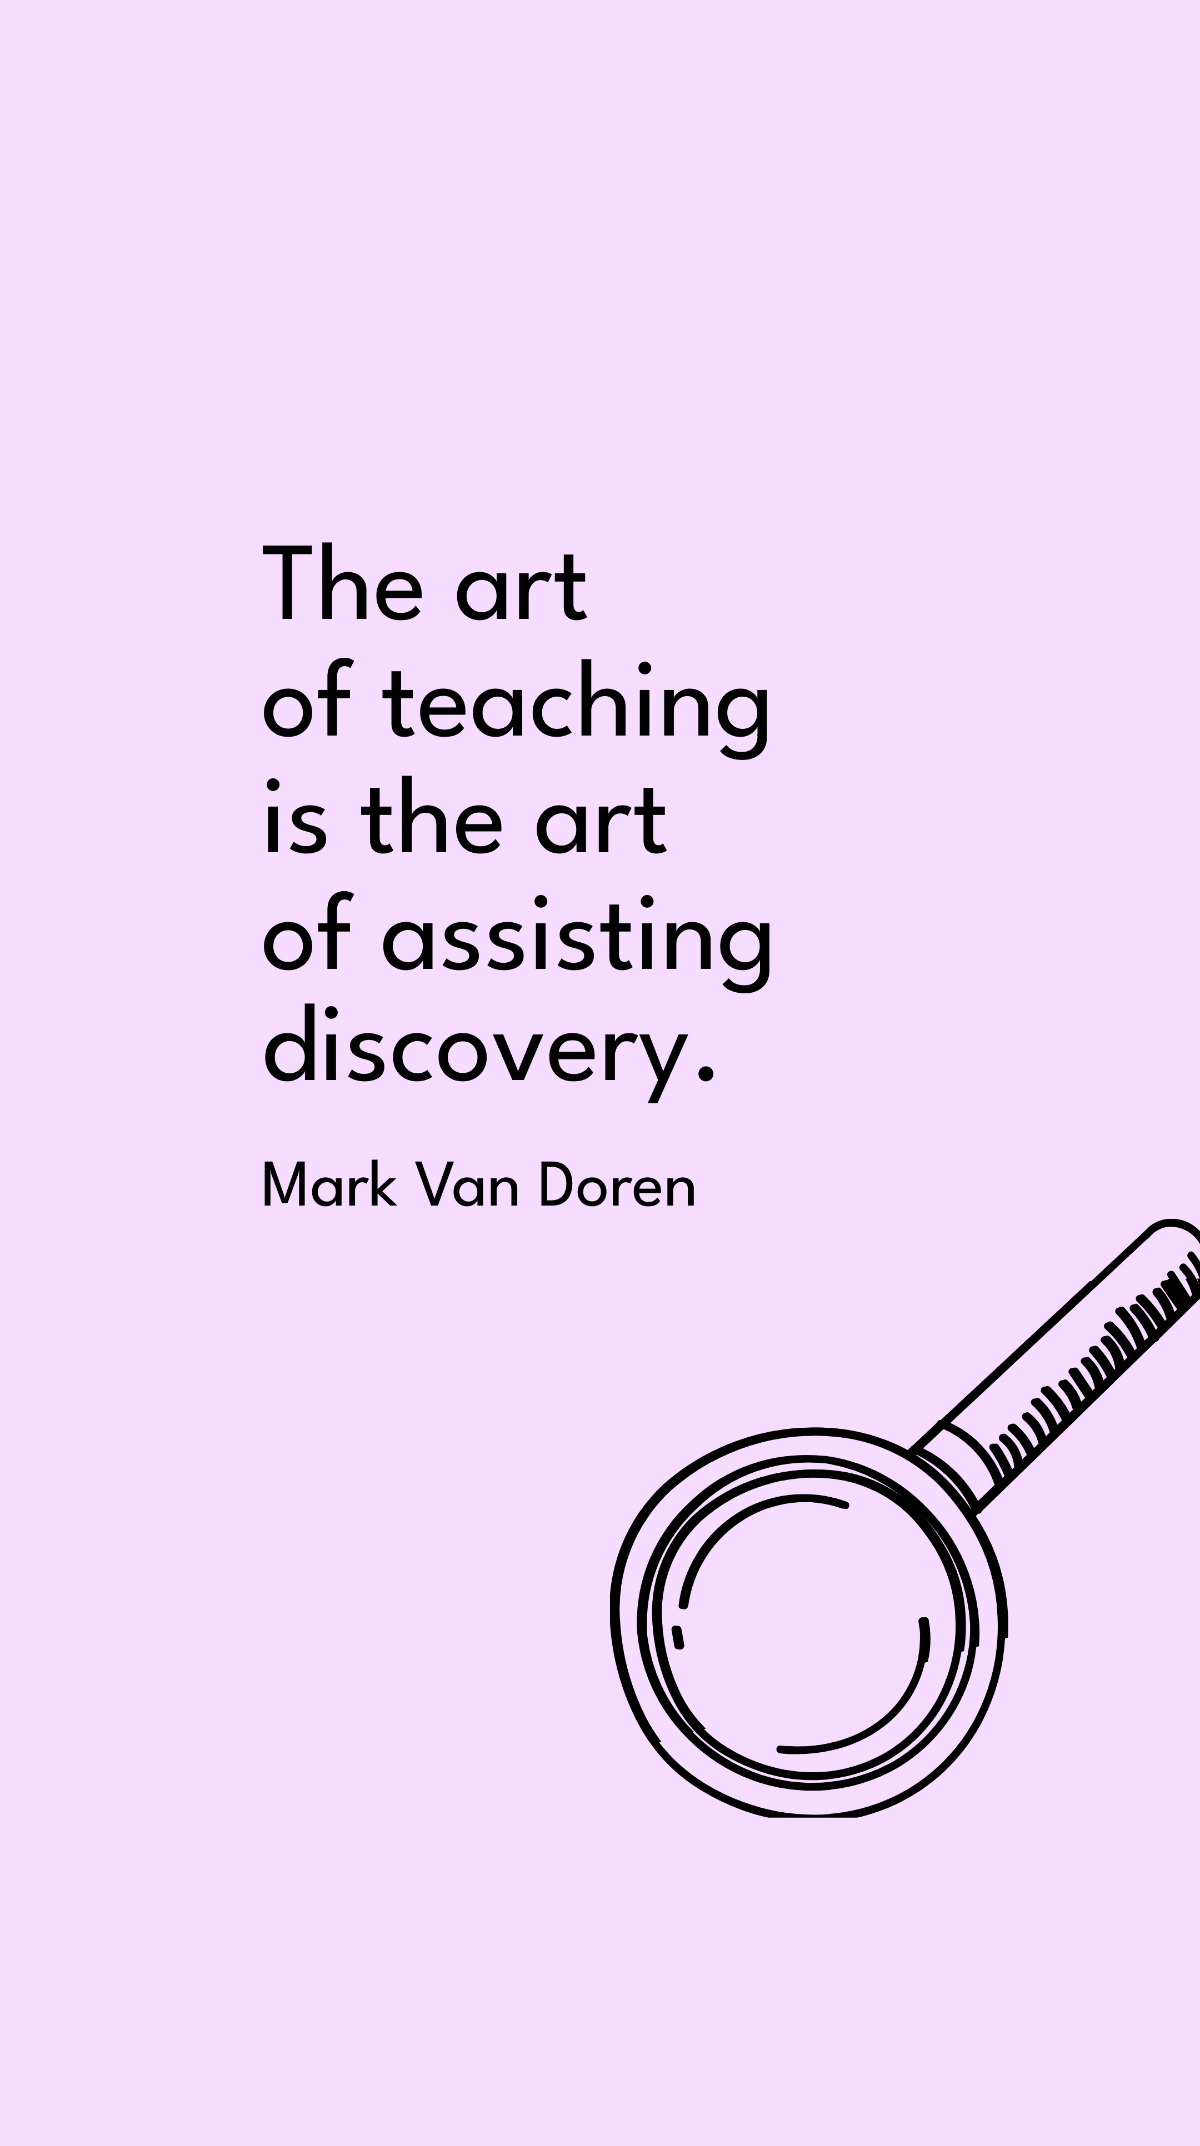 Mark Van Doren - The art of teaching is the art of assisting discovery. Template